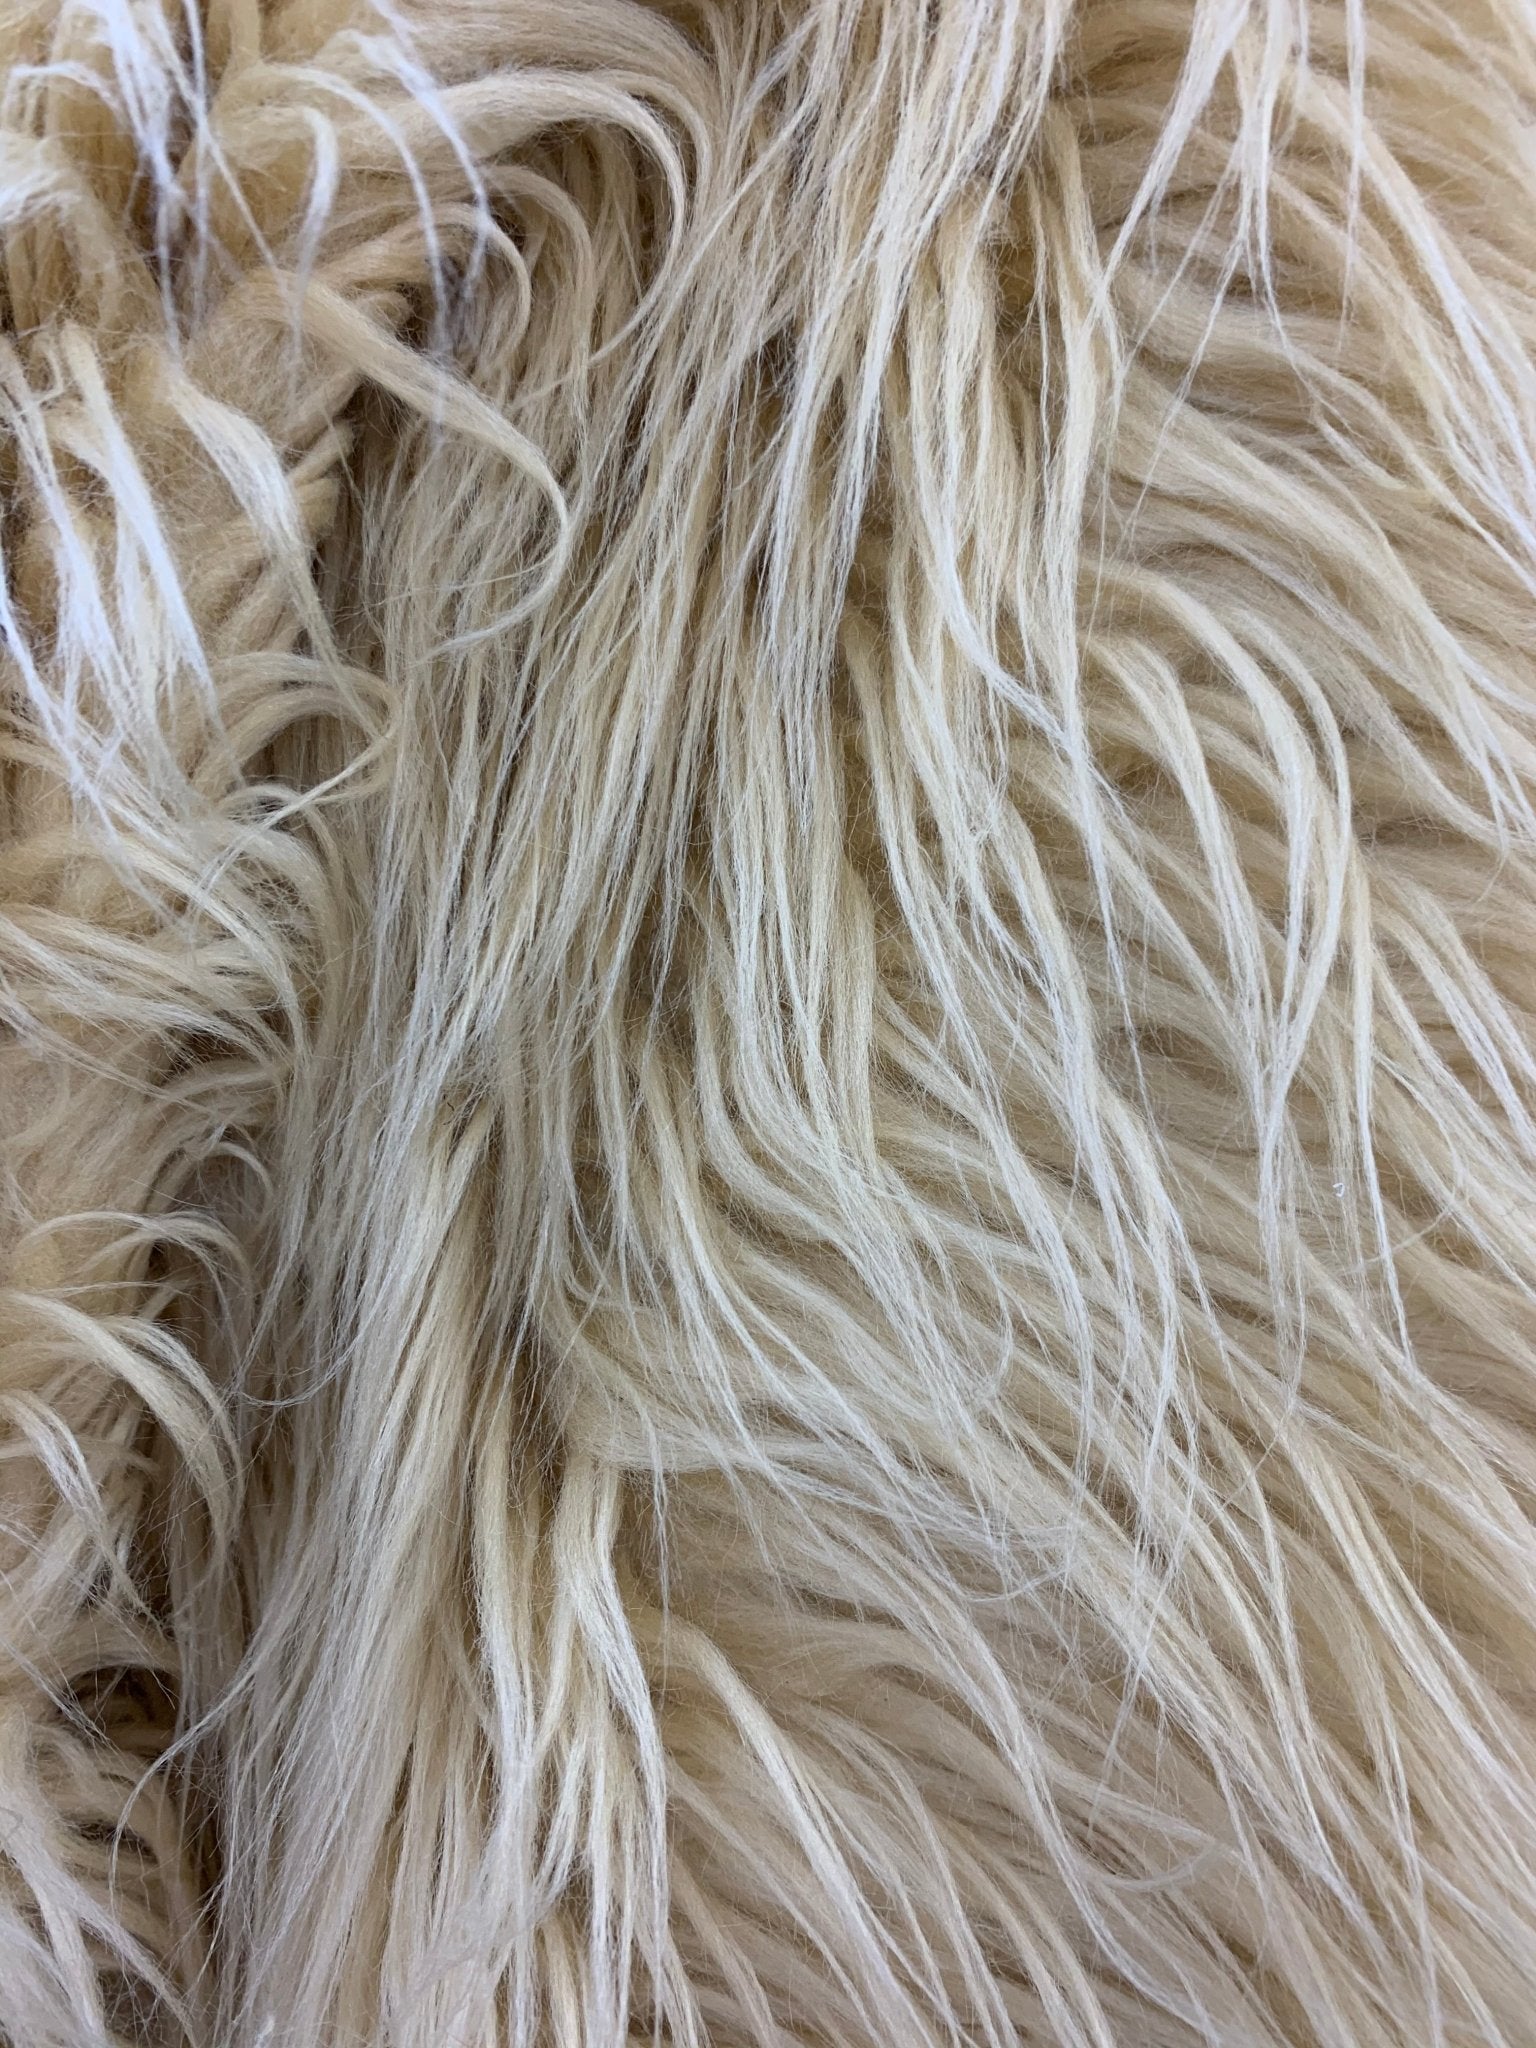 Mongolian Long Pile Fake Faux Fur Fabric Sold By The YardICEFABRICICE FABRICSChampagneBy The Yard (60 inches Wide)Mongolian Long Pile Fake Faux Fur Fabric Sold By The Yard ICEFABRIC